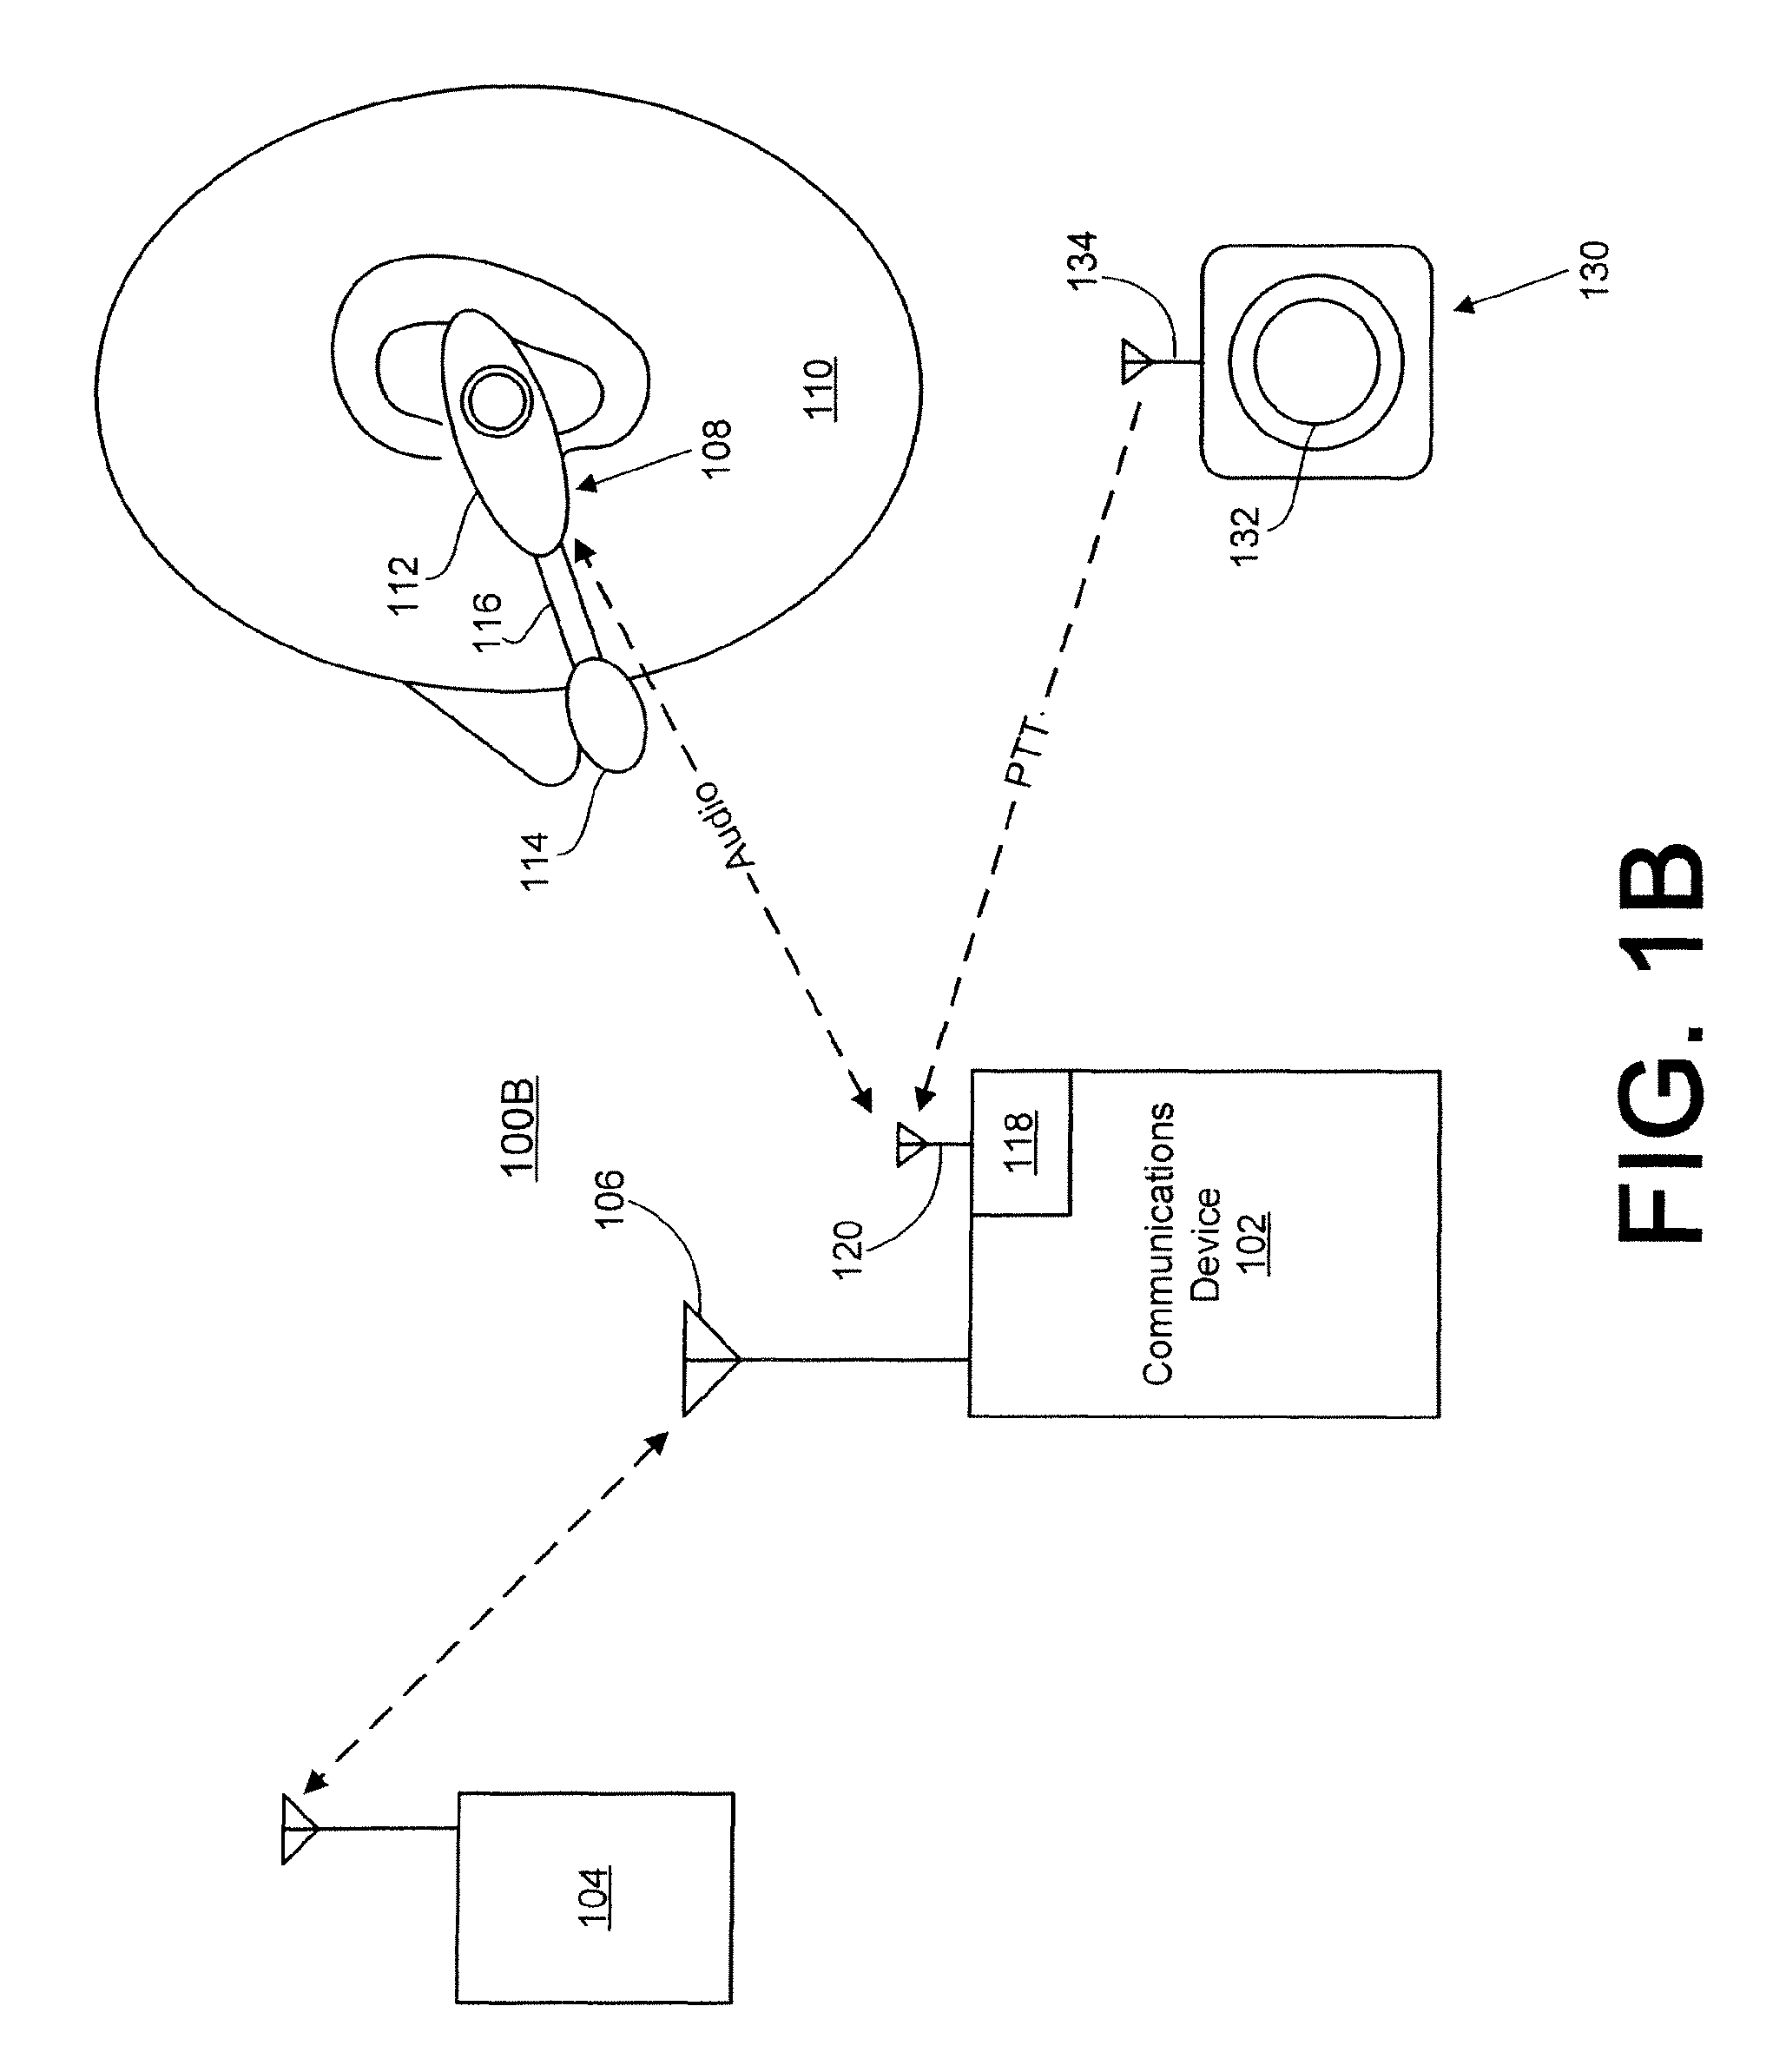 Techniques for wirelessly controlling push-to-talk operation of half-duplex wireless device